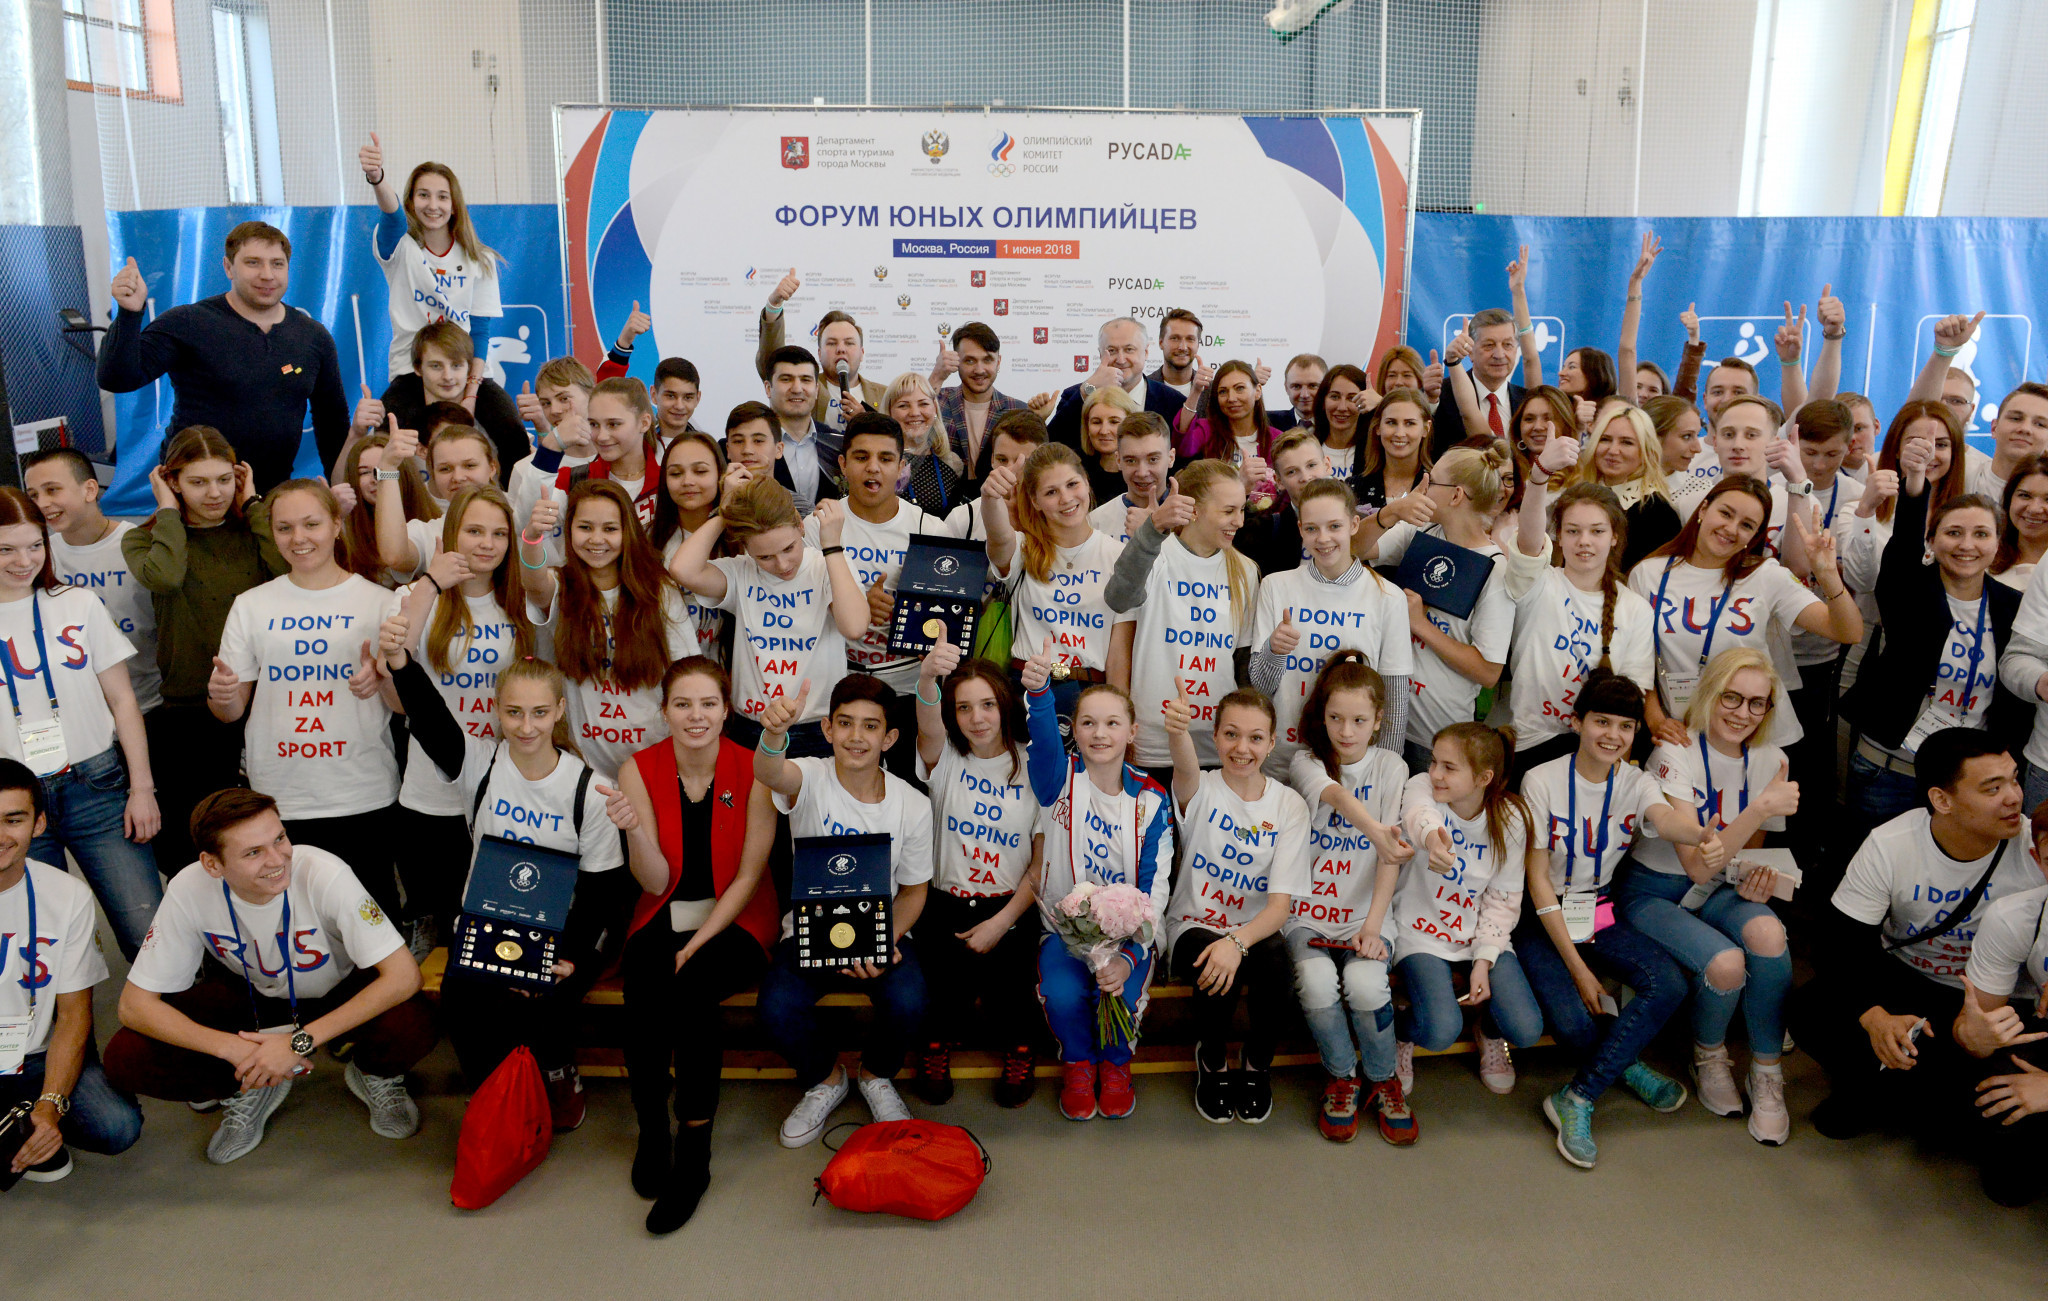 Russian Olympic Committee and RUSADA host Young Olympians forum